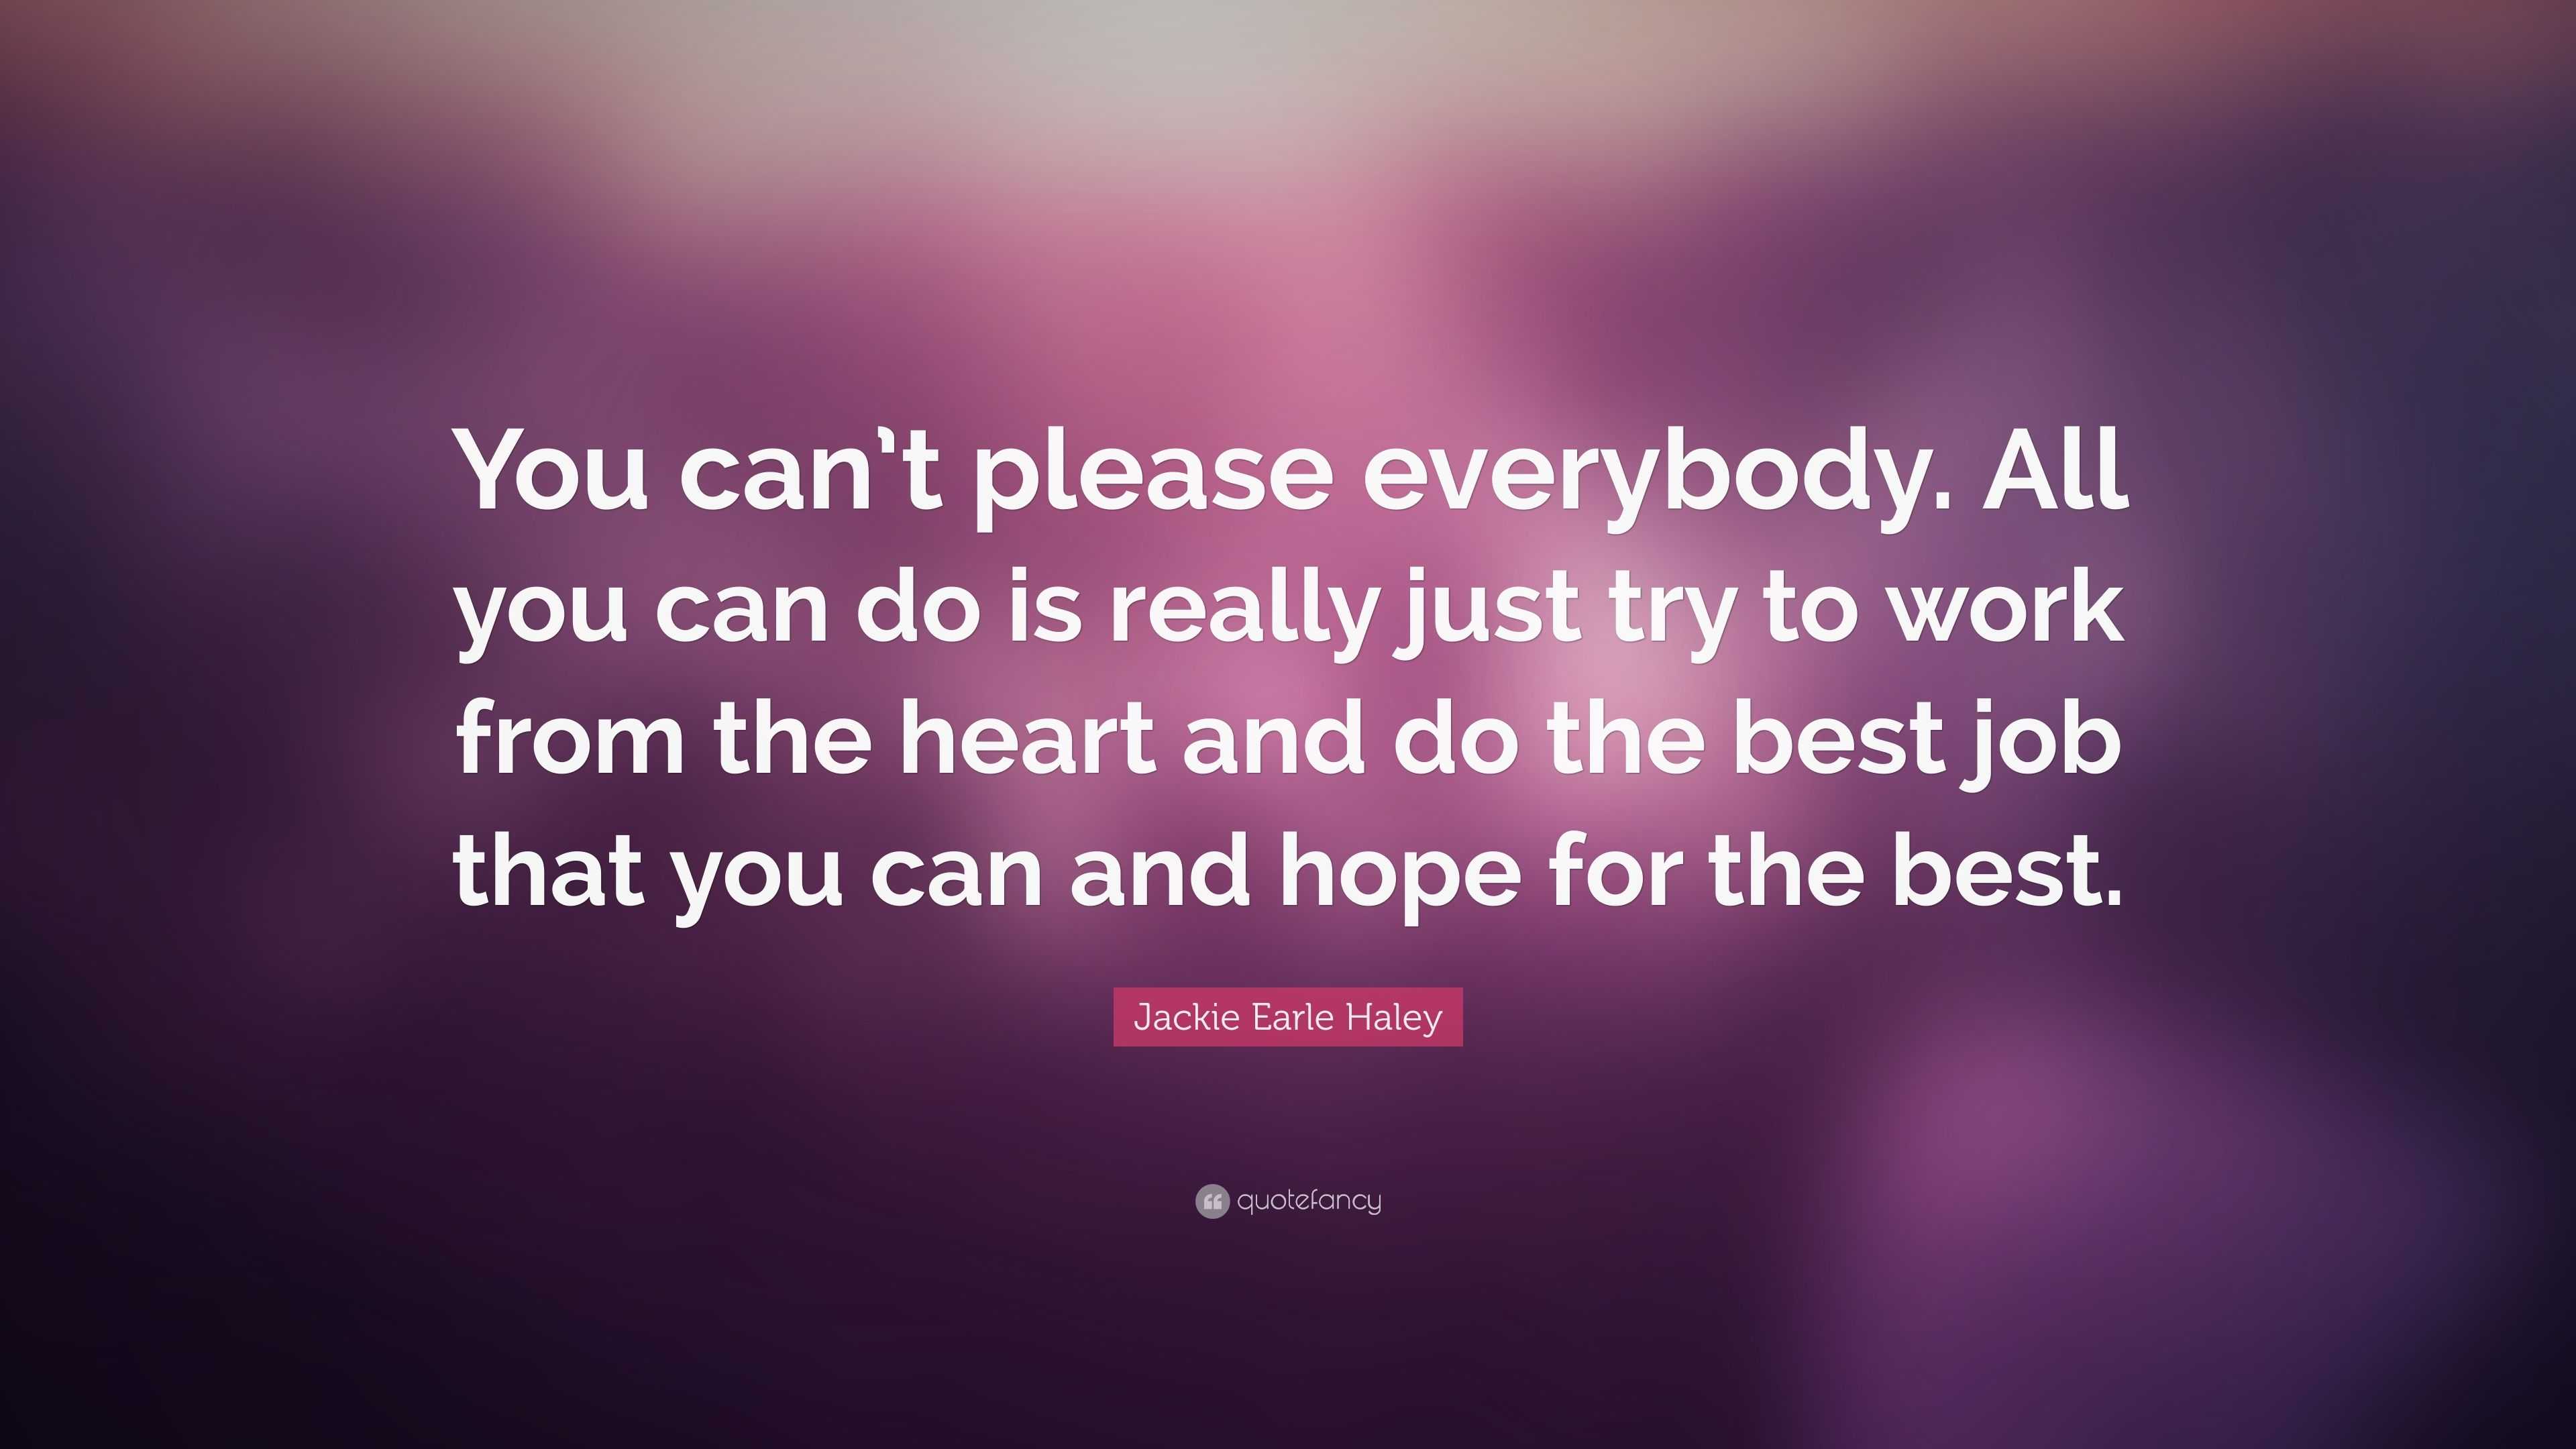 Jackie Earle Haley Quote: “You can't please everybody. All you can do is  really just try to work from the heart and do the best job that you can  an”